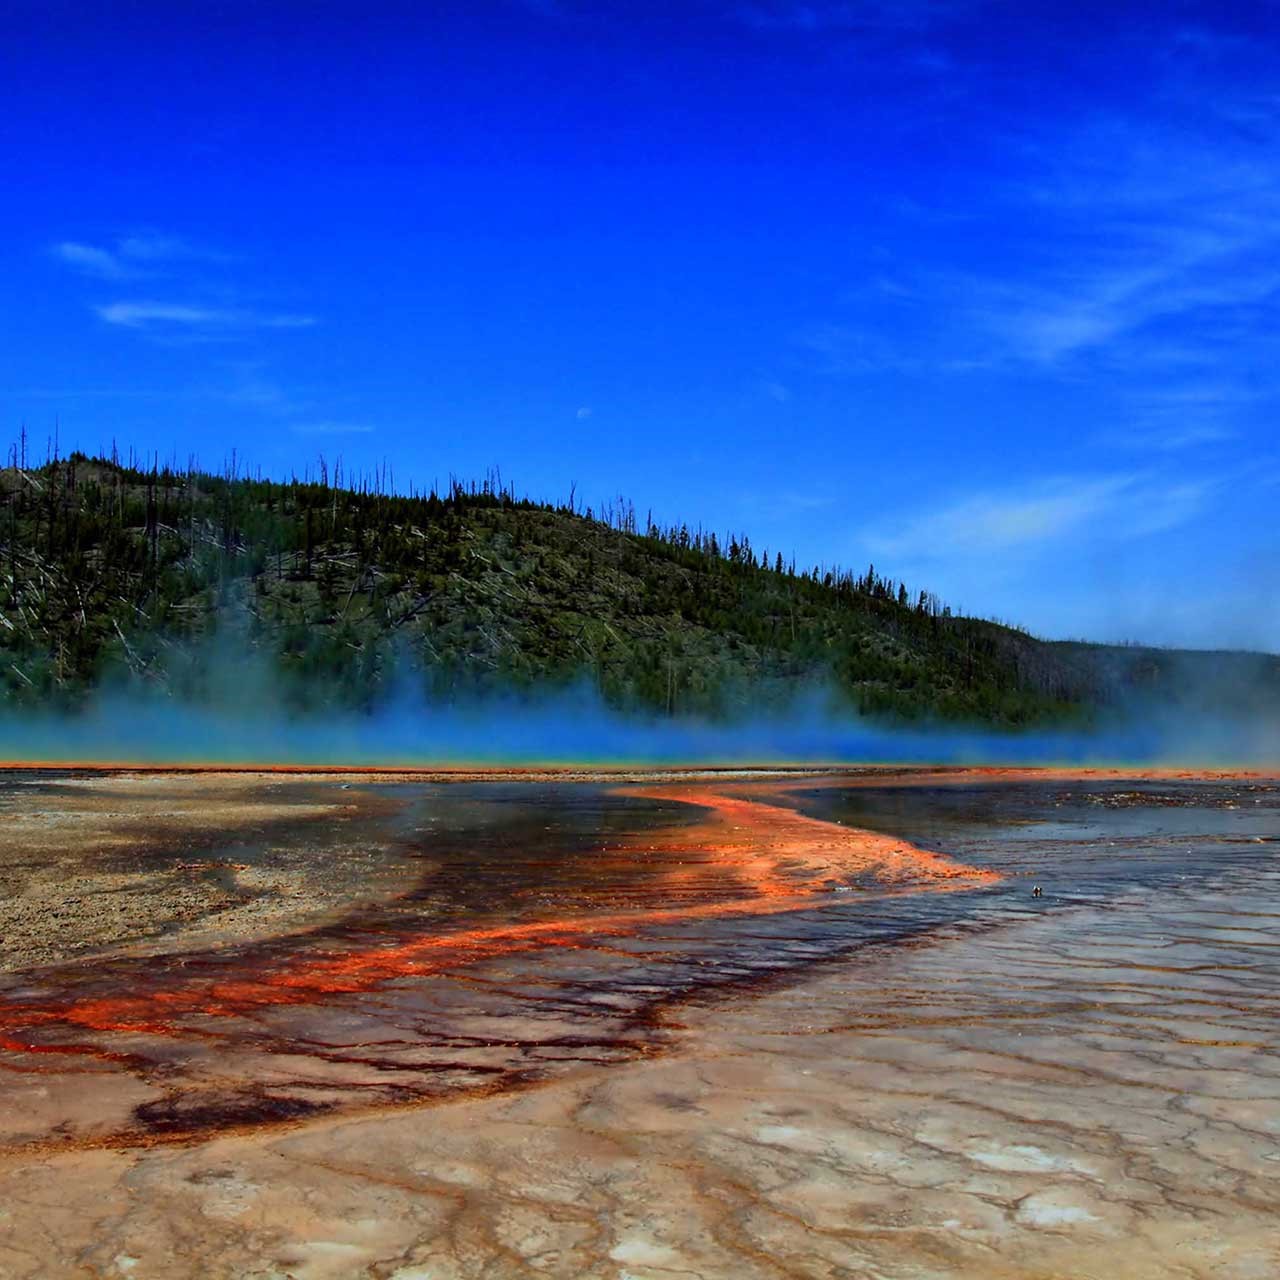 The Grand Prismatic Spring of Yellowstone National Park showing steam rising from hot water, which is surrounded by huge mats of brilliant orange algae and bacteria